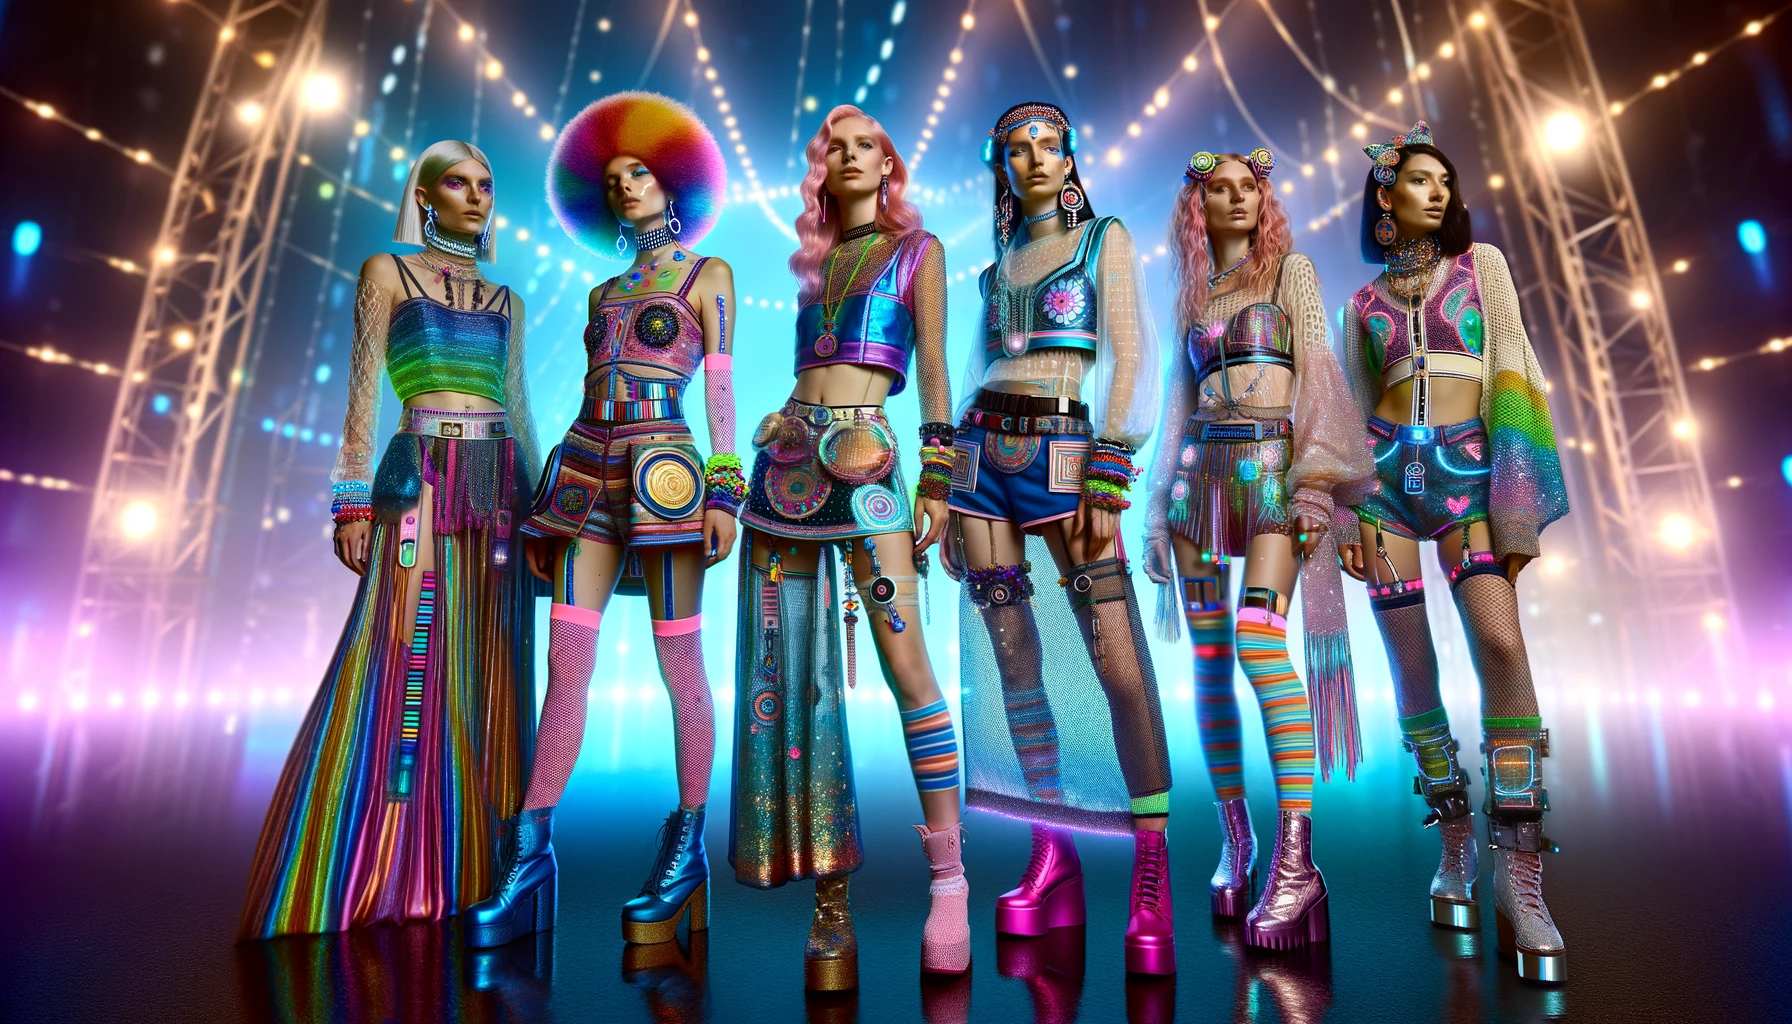 This illustration captures the vibrant and eclectic styles found in modern rave culture, showcasing colorful outfits, glittery accessories, and bold makeup against the backdrop of a festival environment.